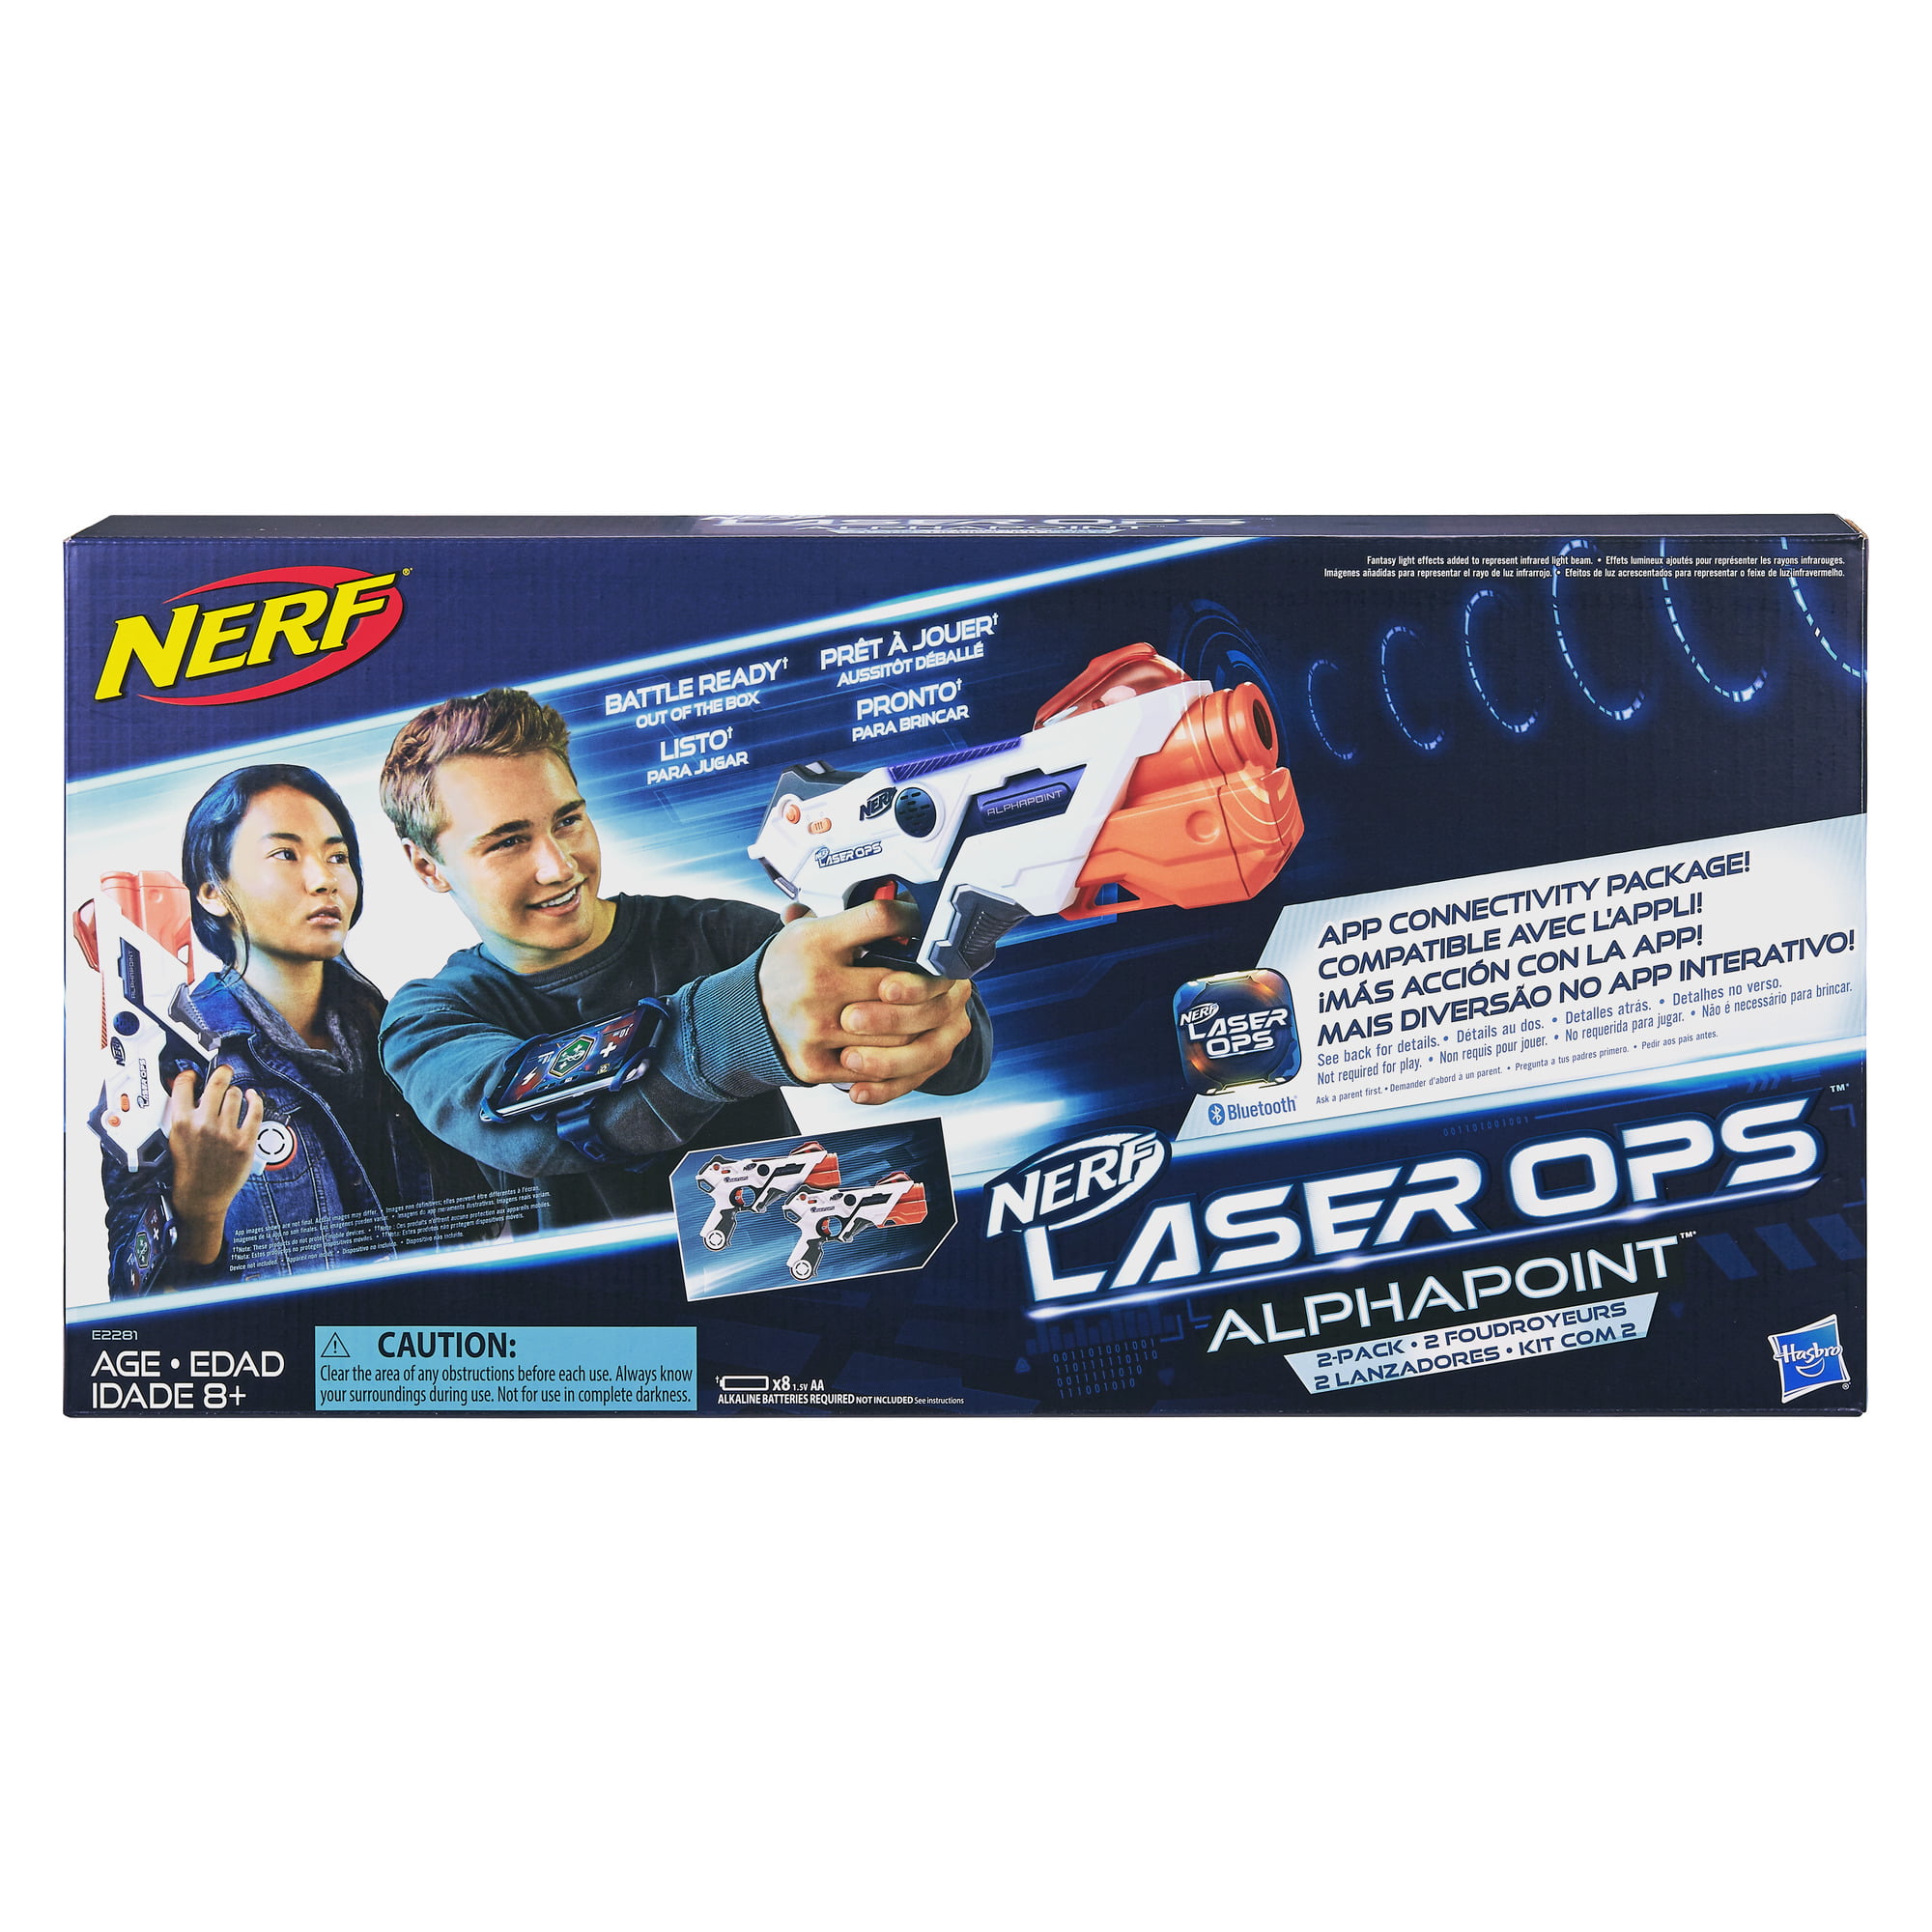 NERF LASER OPS PRO ALPHAPOINT 